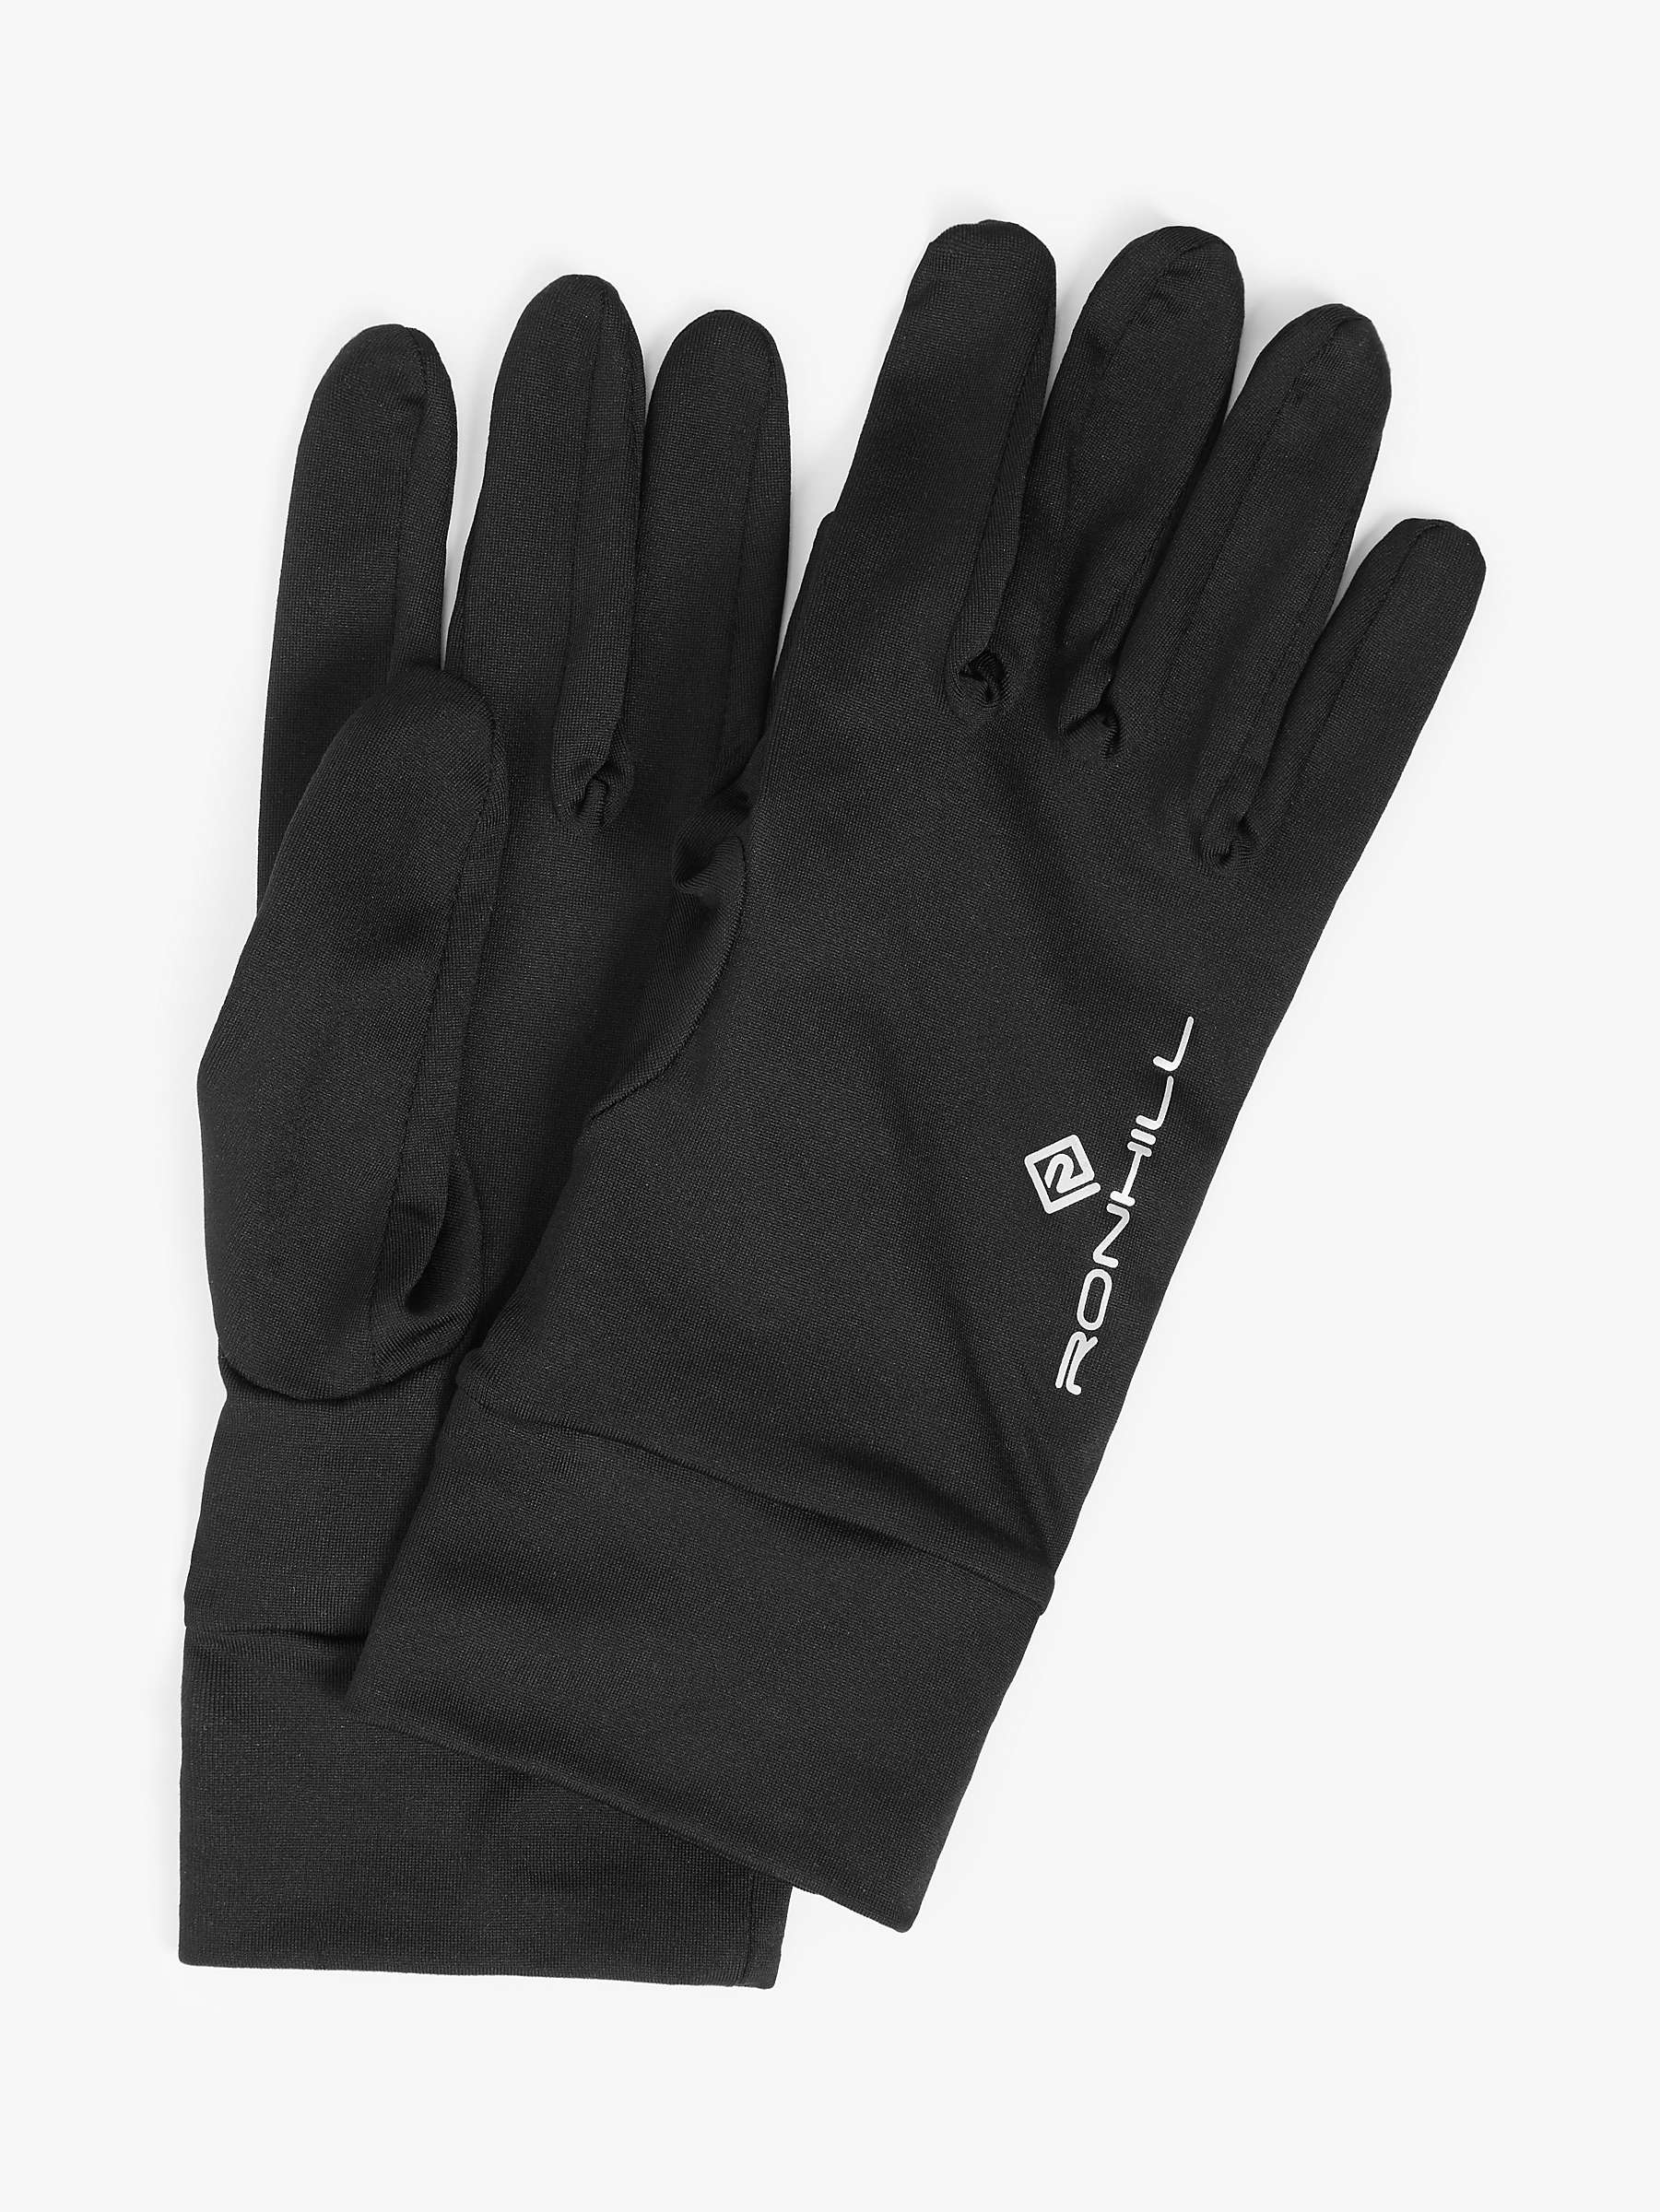 Buy Ronhill Classic Running Gloves, Black Online at johnlewis.com